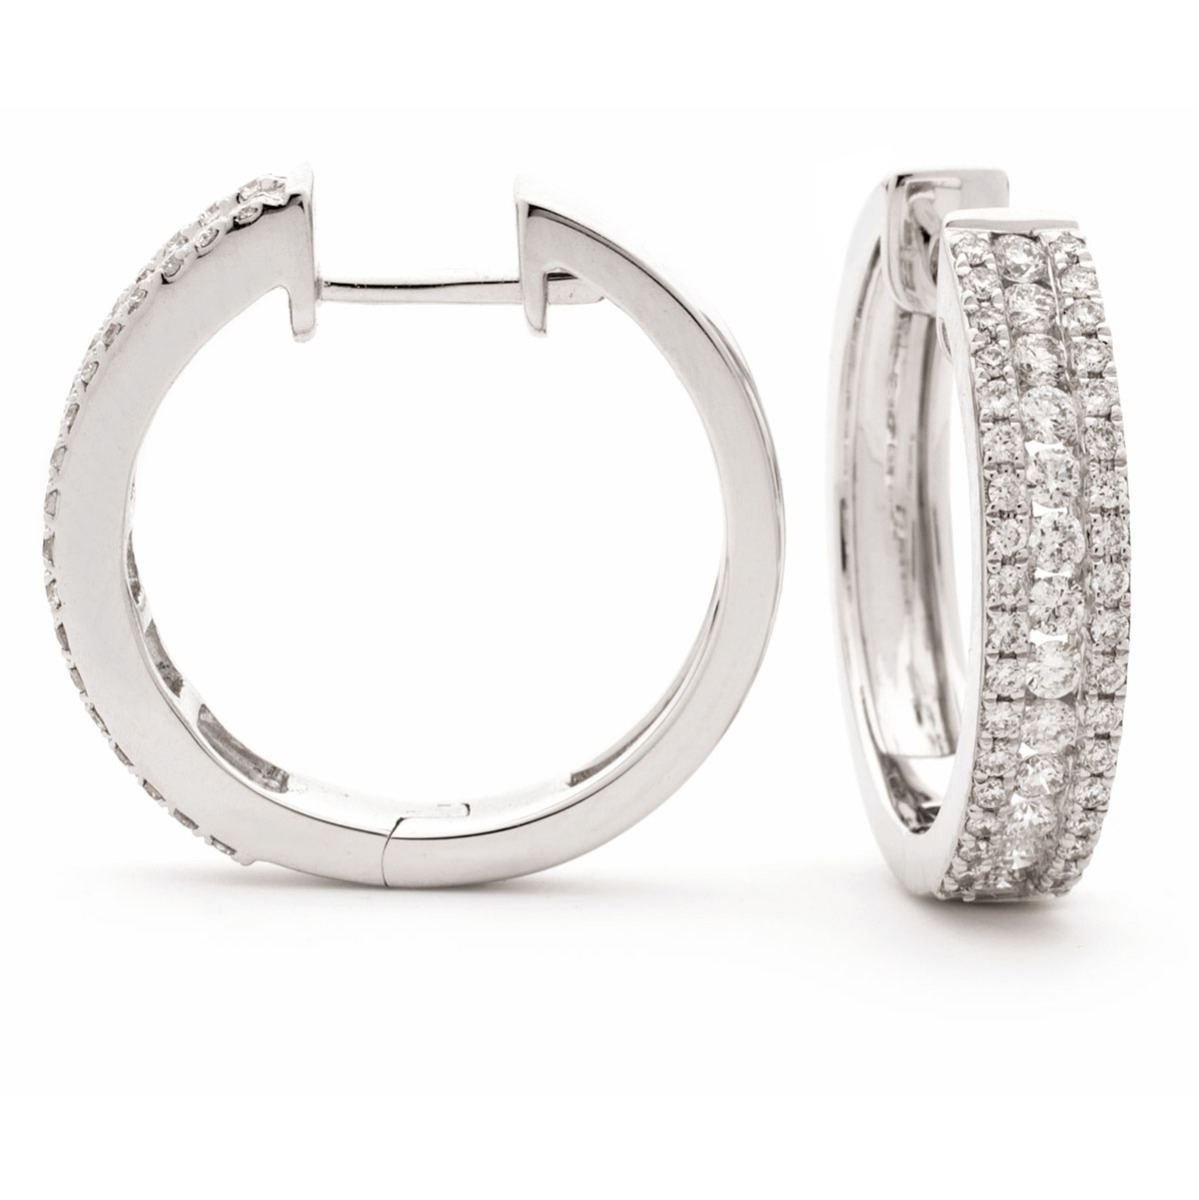 3 Row Round In And Out Diamond Hoops Earrings